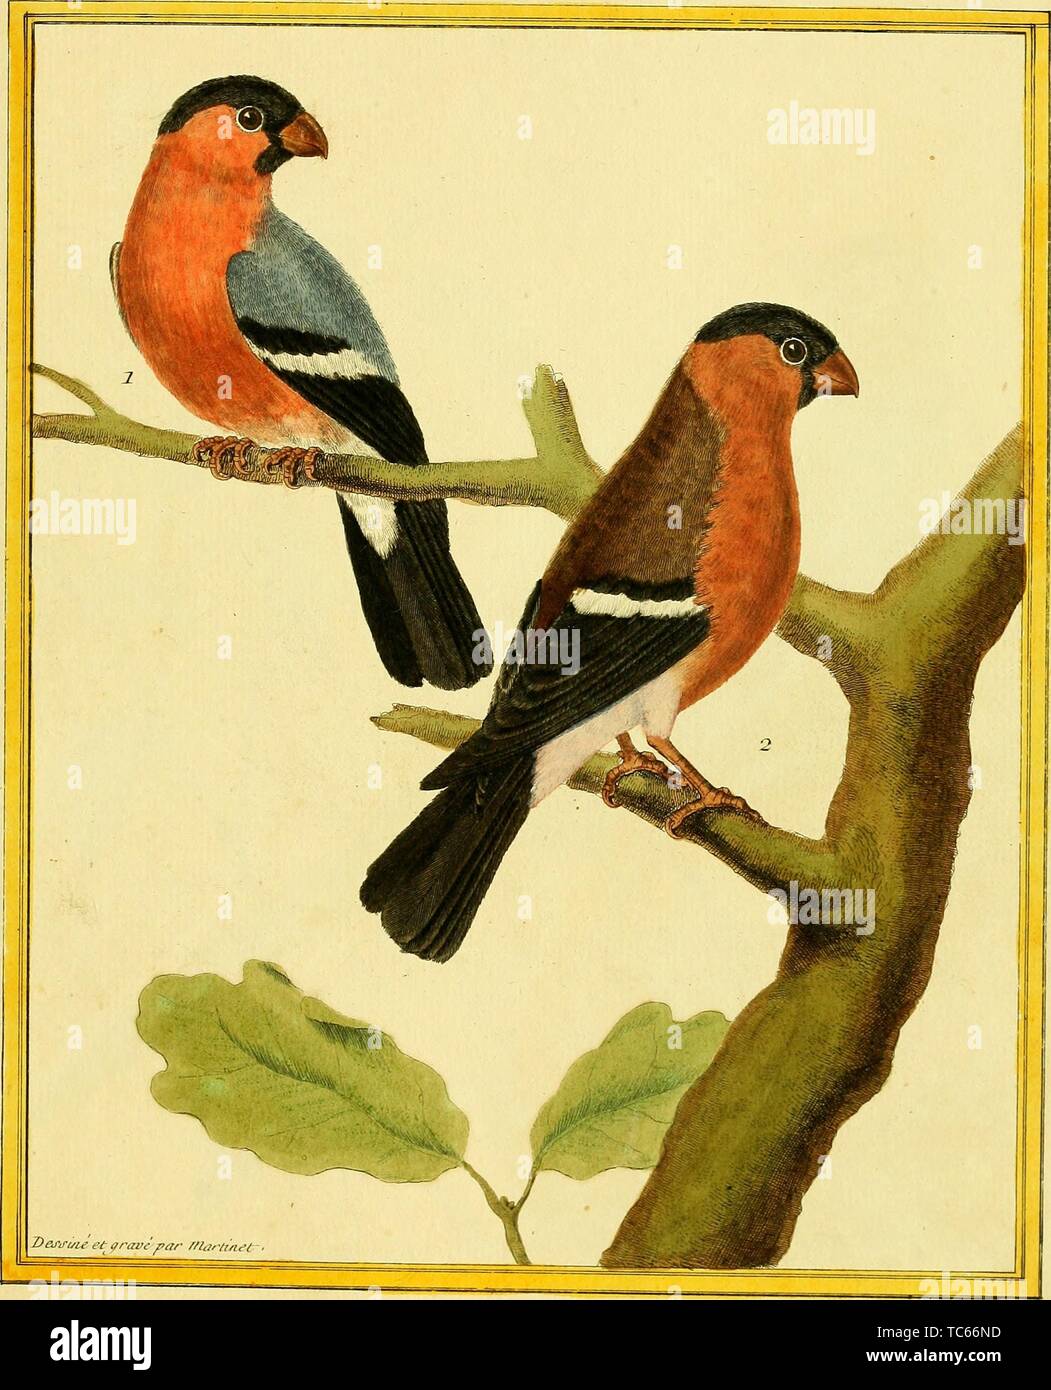 Engraved drawings of the Eurasian Bullfinches (Pyrrhula pyrrhula), male and female, from the book 'Planches enluminees Dhistoire naturelle' by Francois Nicolas, Louis Jean Marie Daubenton, and Edme-Louis Daubenton, 1765. Courtesy Internet Archive. () Stock Photo